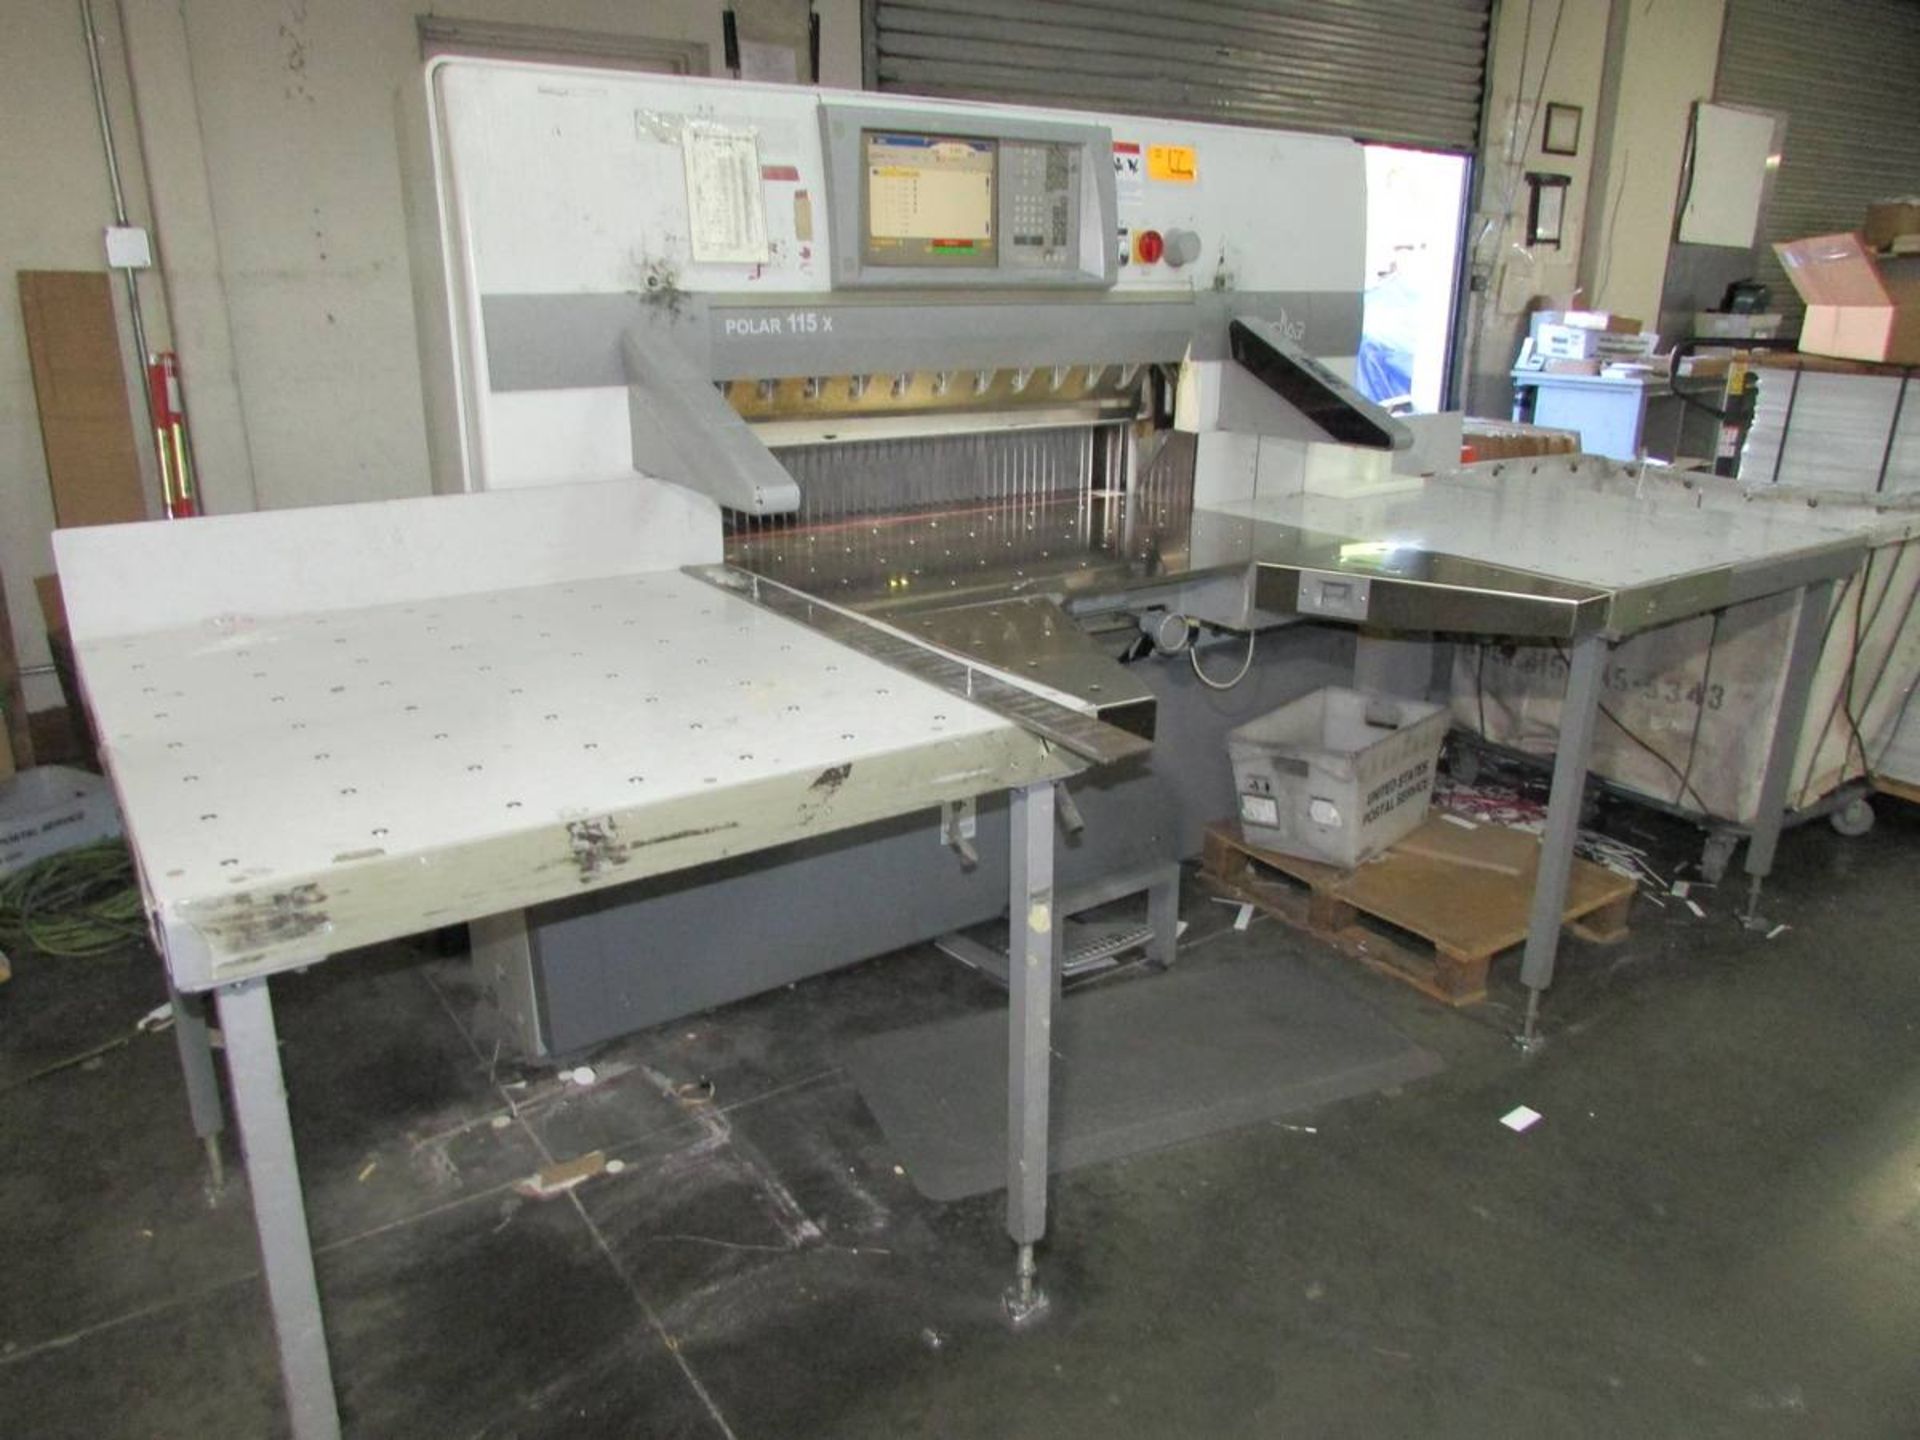 2004 Polar 115X 45" Paper Cutter - Image 3 of 18